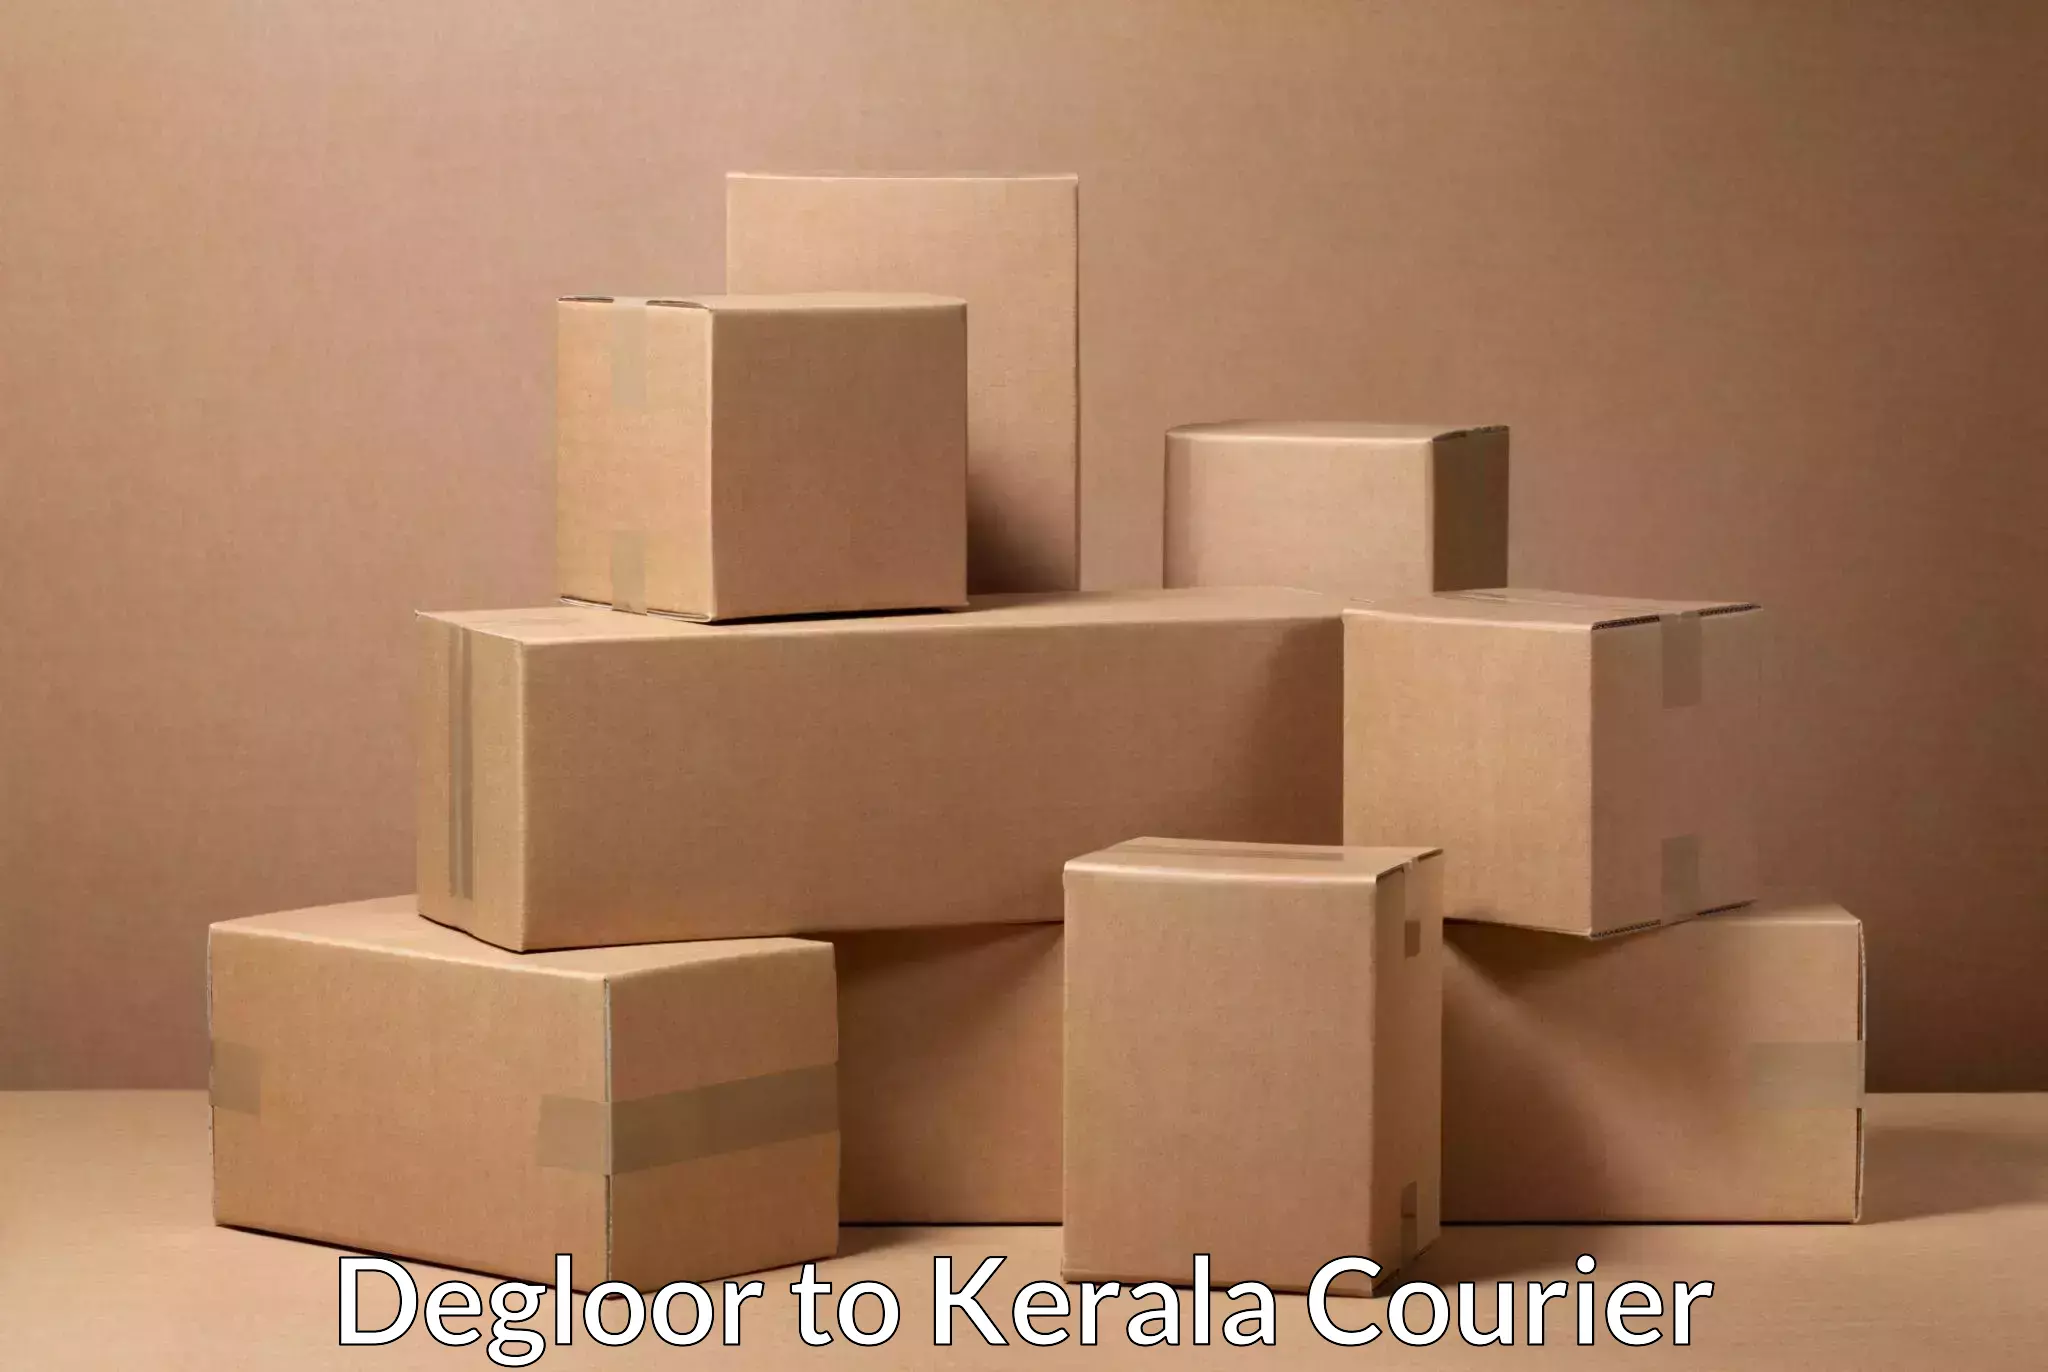 Global shipping solutions Degloor to Kerala